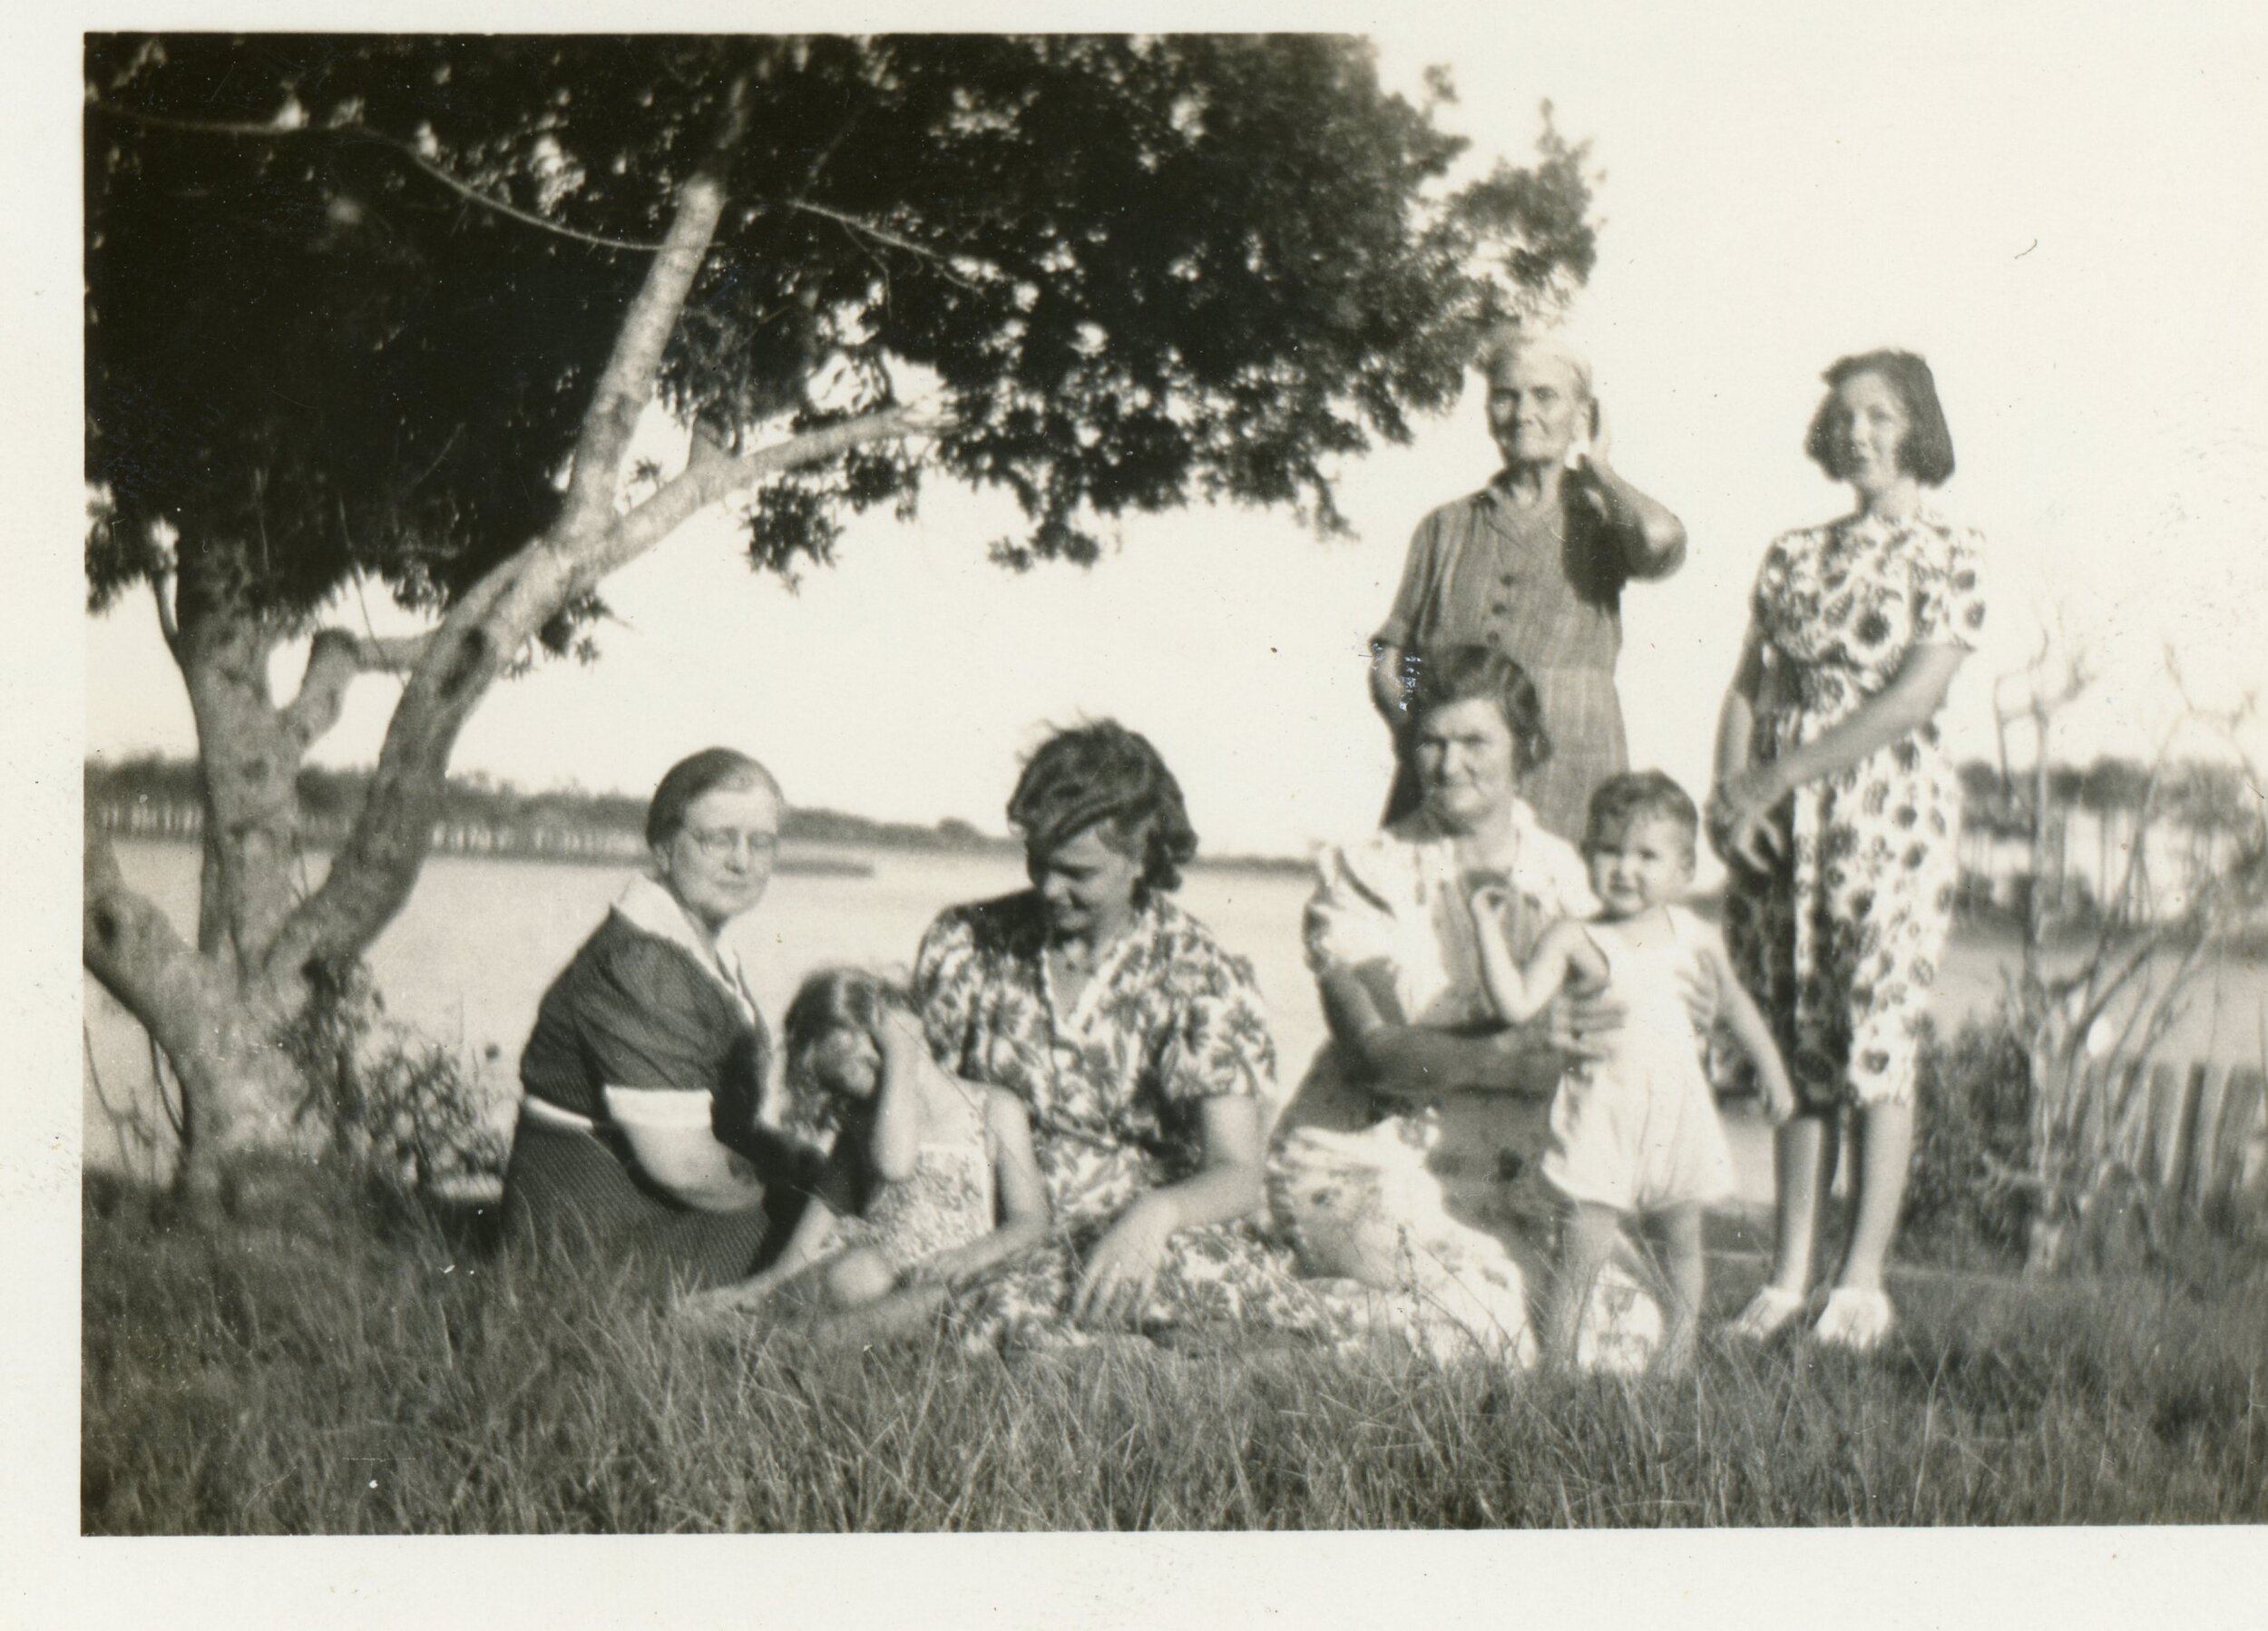  Picture taken August 7, 1938 at the Pigott home on Stewart Drive Ethel Pigott, Dorothy Lewis Chadwick (Martha Davis, Marina’s daughter). Pauline Wade(sister of Euclid) holding Ruth (Pauline’s daughter), Jessie Pigott (sister to Ethel Pigott Lewis), 